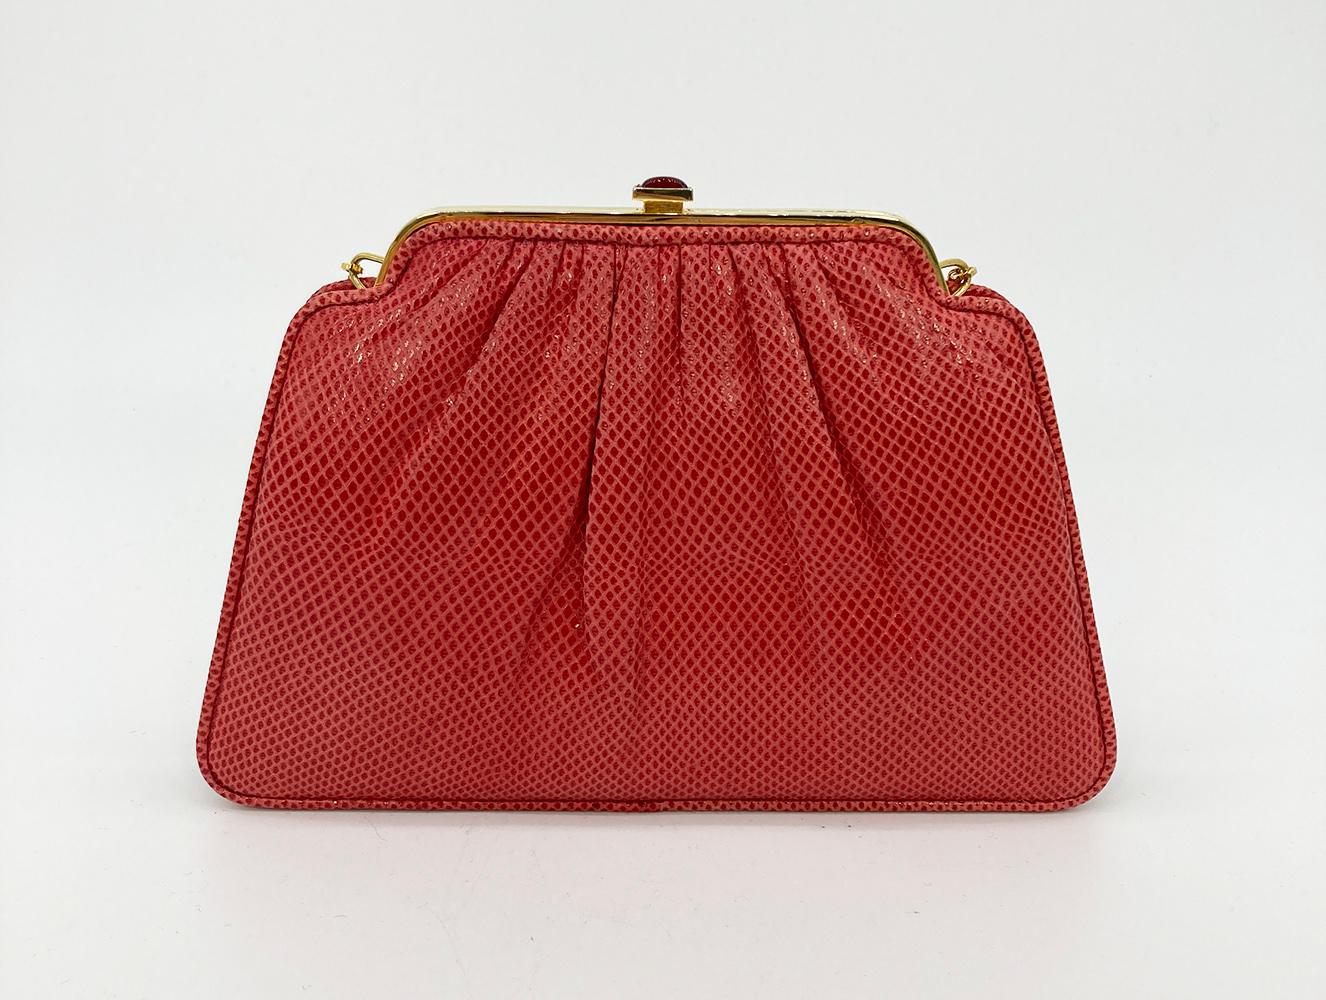 Judith Leiber Red Lizard Small Shoulder Bag In Good Condition For Sale In Philadelphia, PA